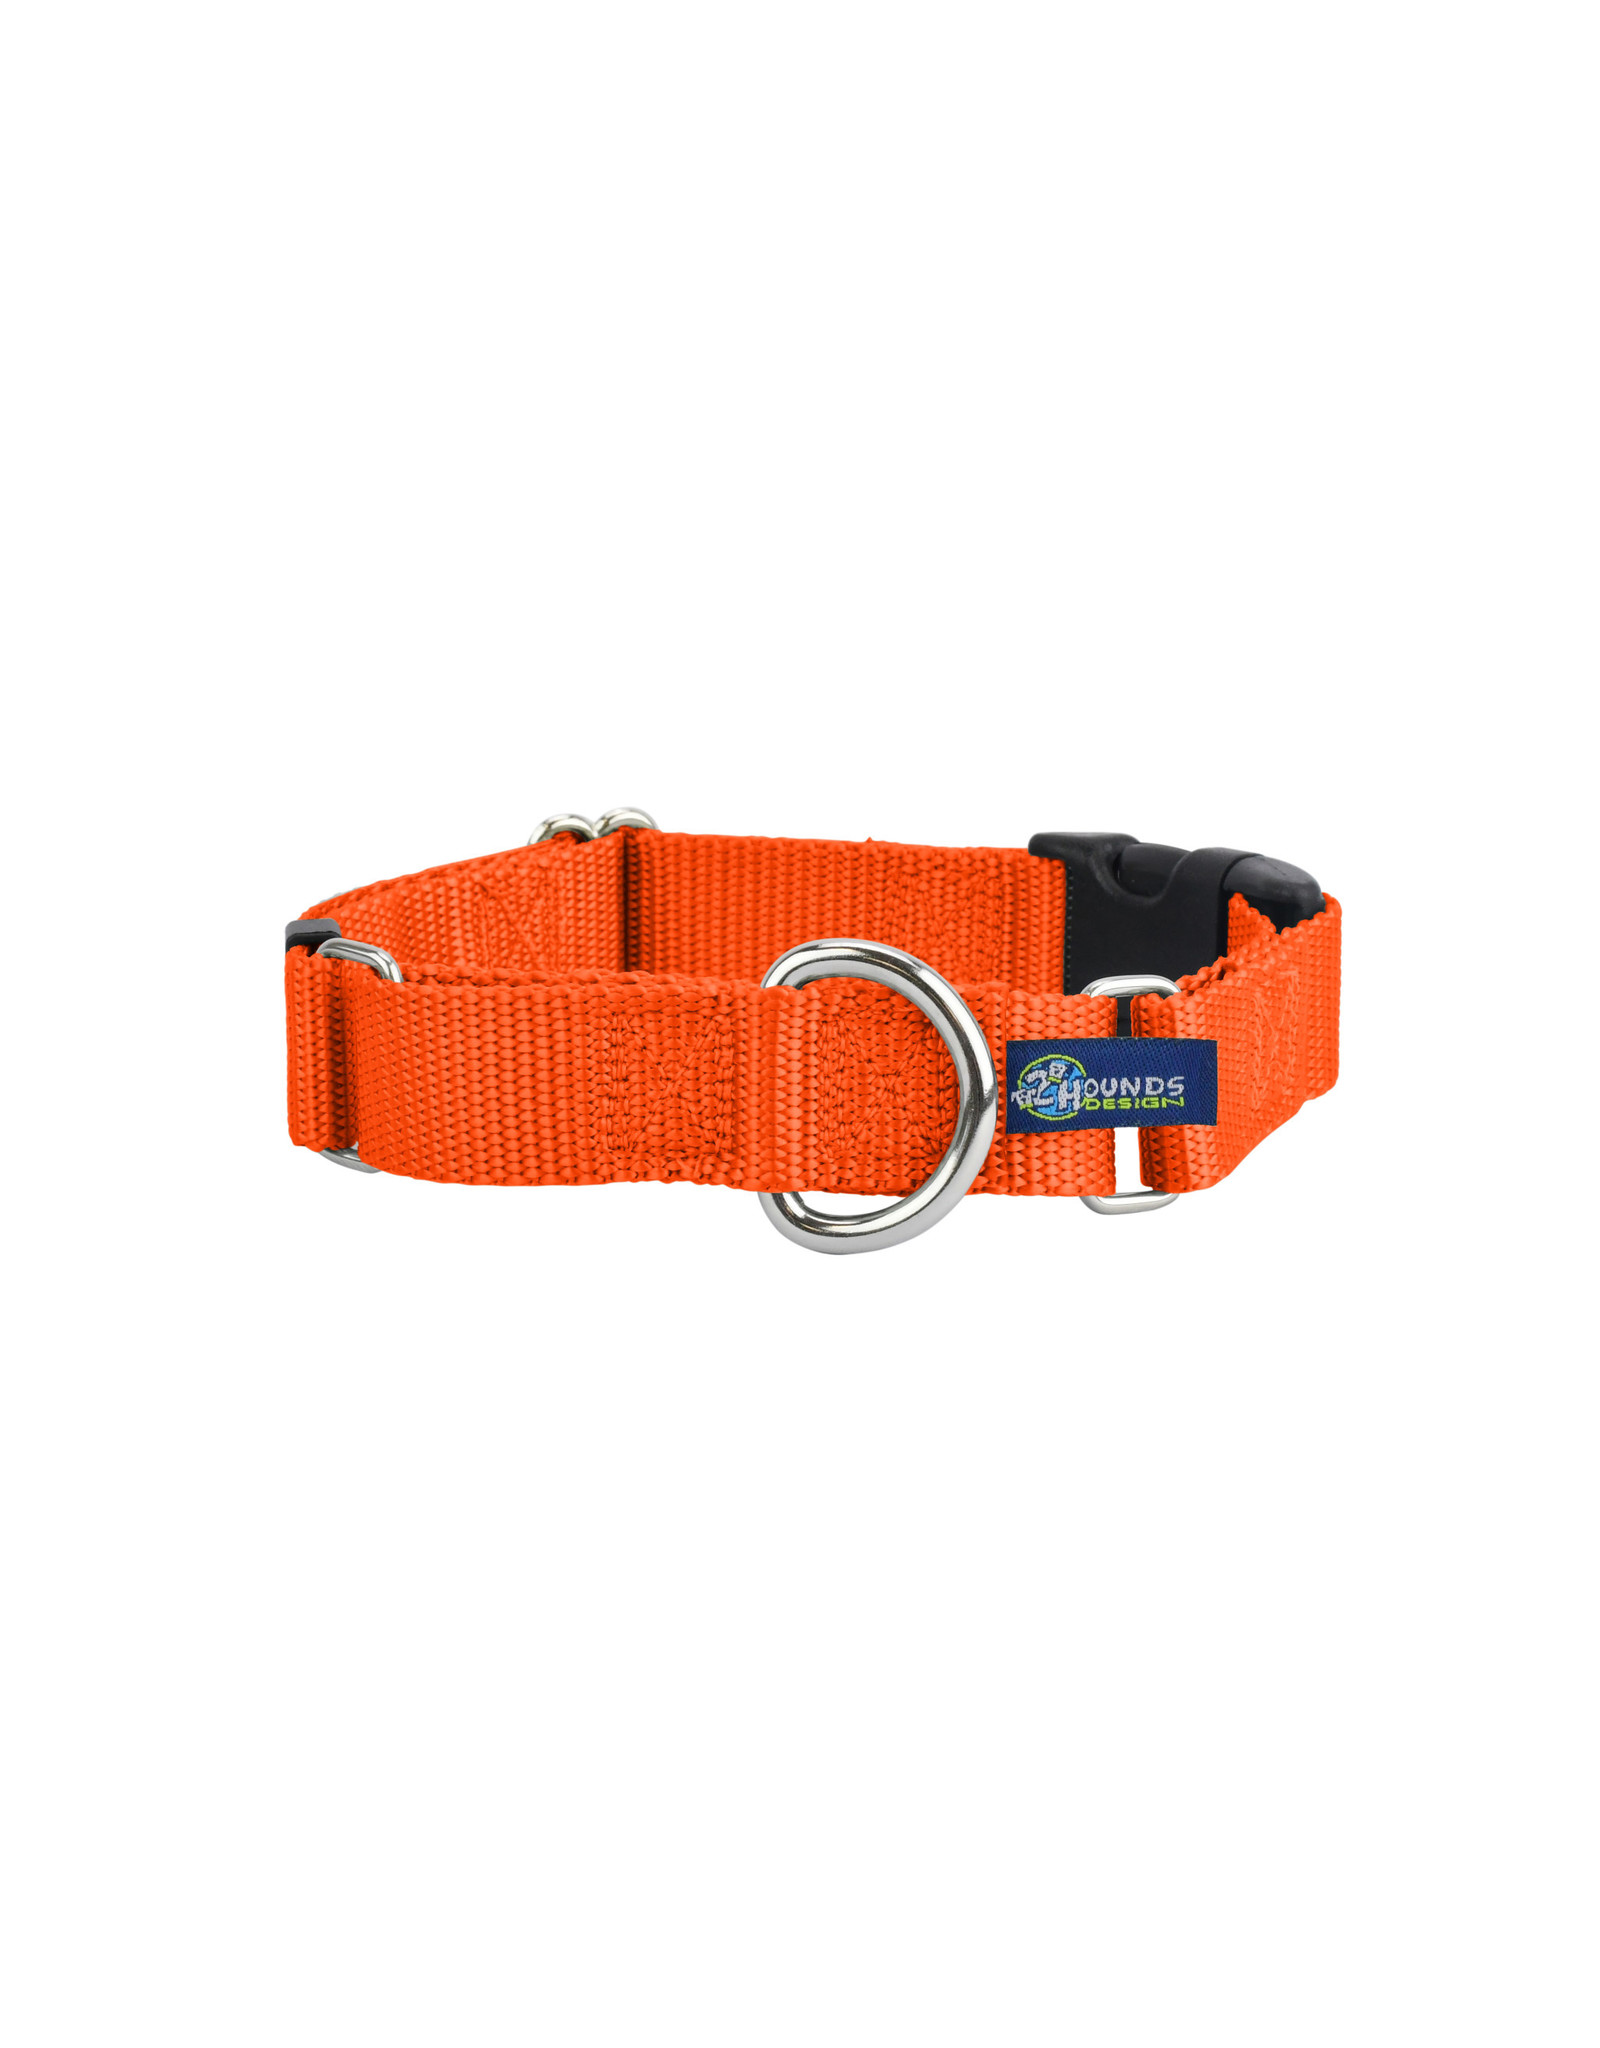 2 Hounds Design Martingale w/ buckle: Rust, 1" XL